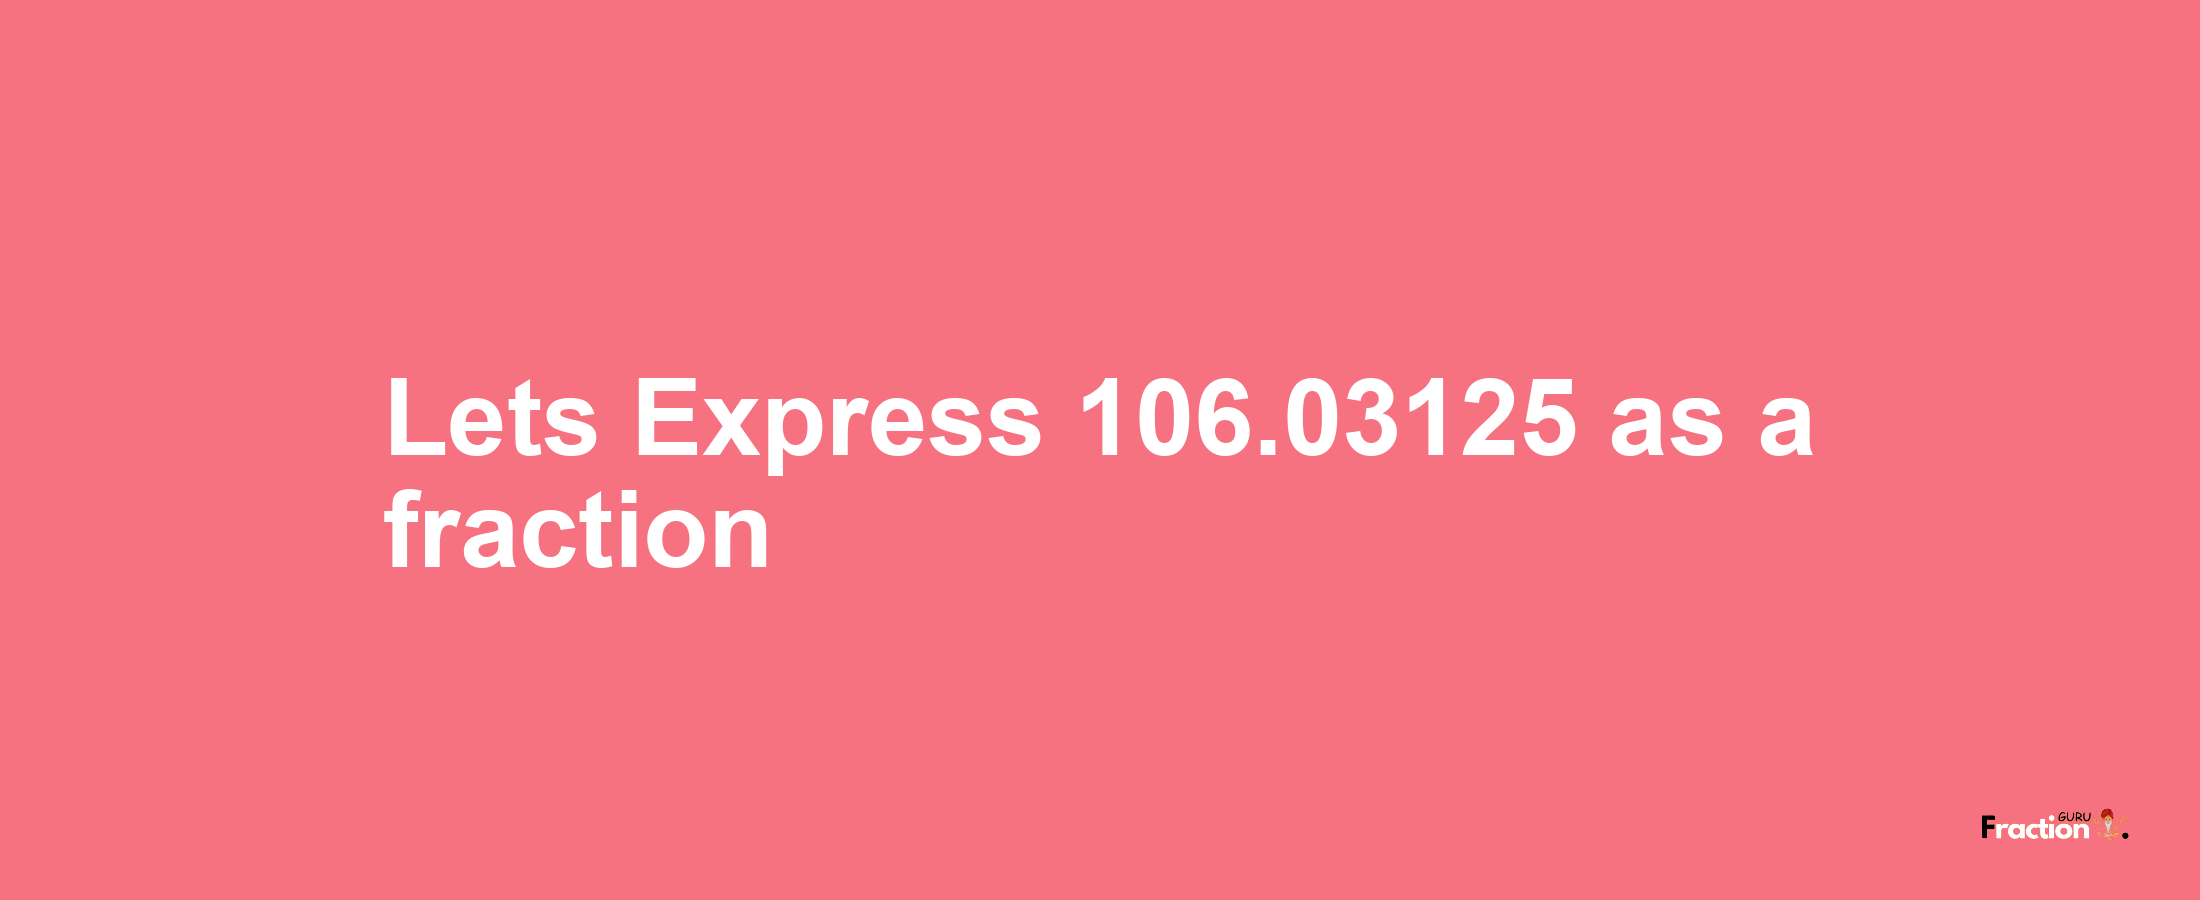 Lets Express 106.03125 as afraction